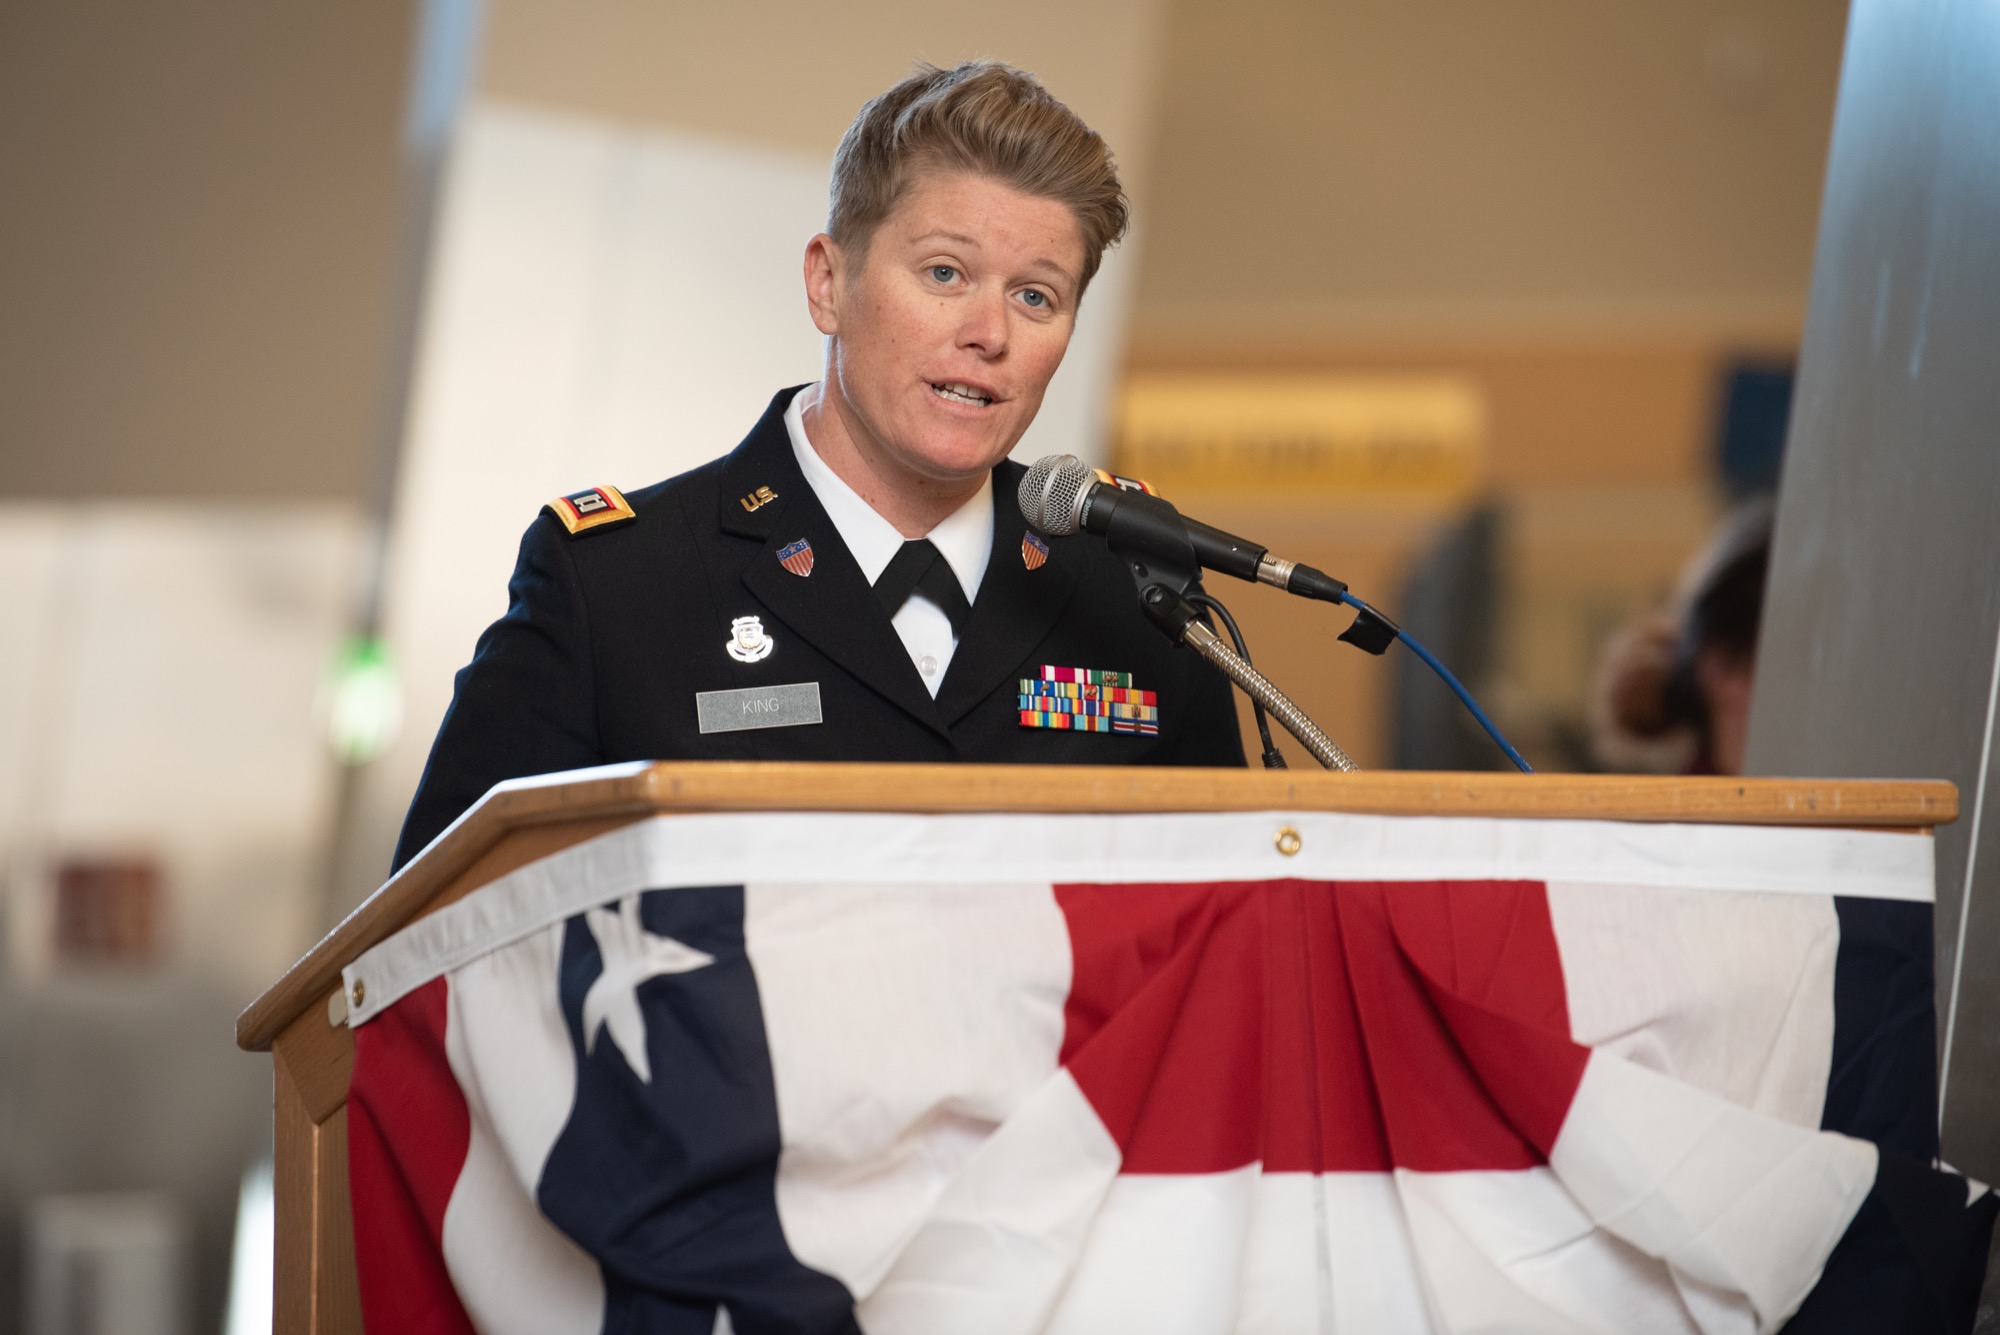 Alaska Army National Guard Capt. Jill King, M.B.A. General Management ’13, speaking at UAA’s Veterans Day Celebration in the Alaska Airlines Center on Nov. 11, 2019. (Photo by James Evans / University of Alaska Anchorage)